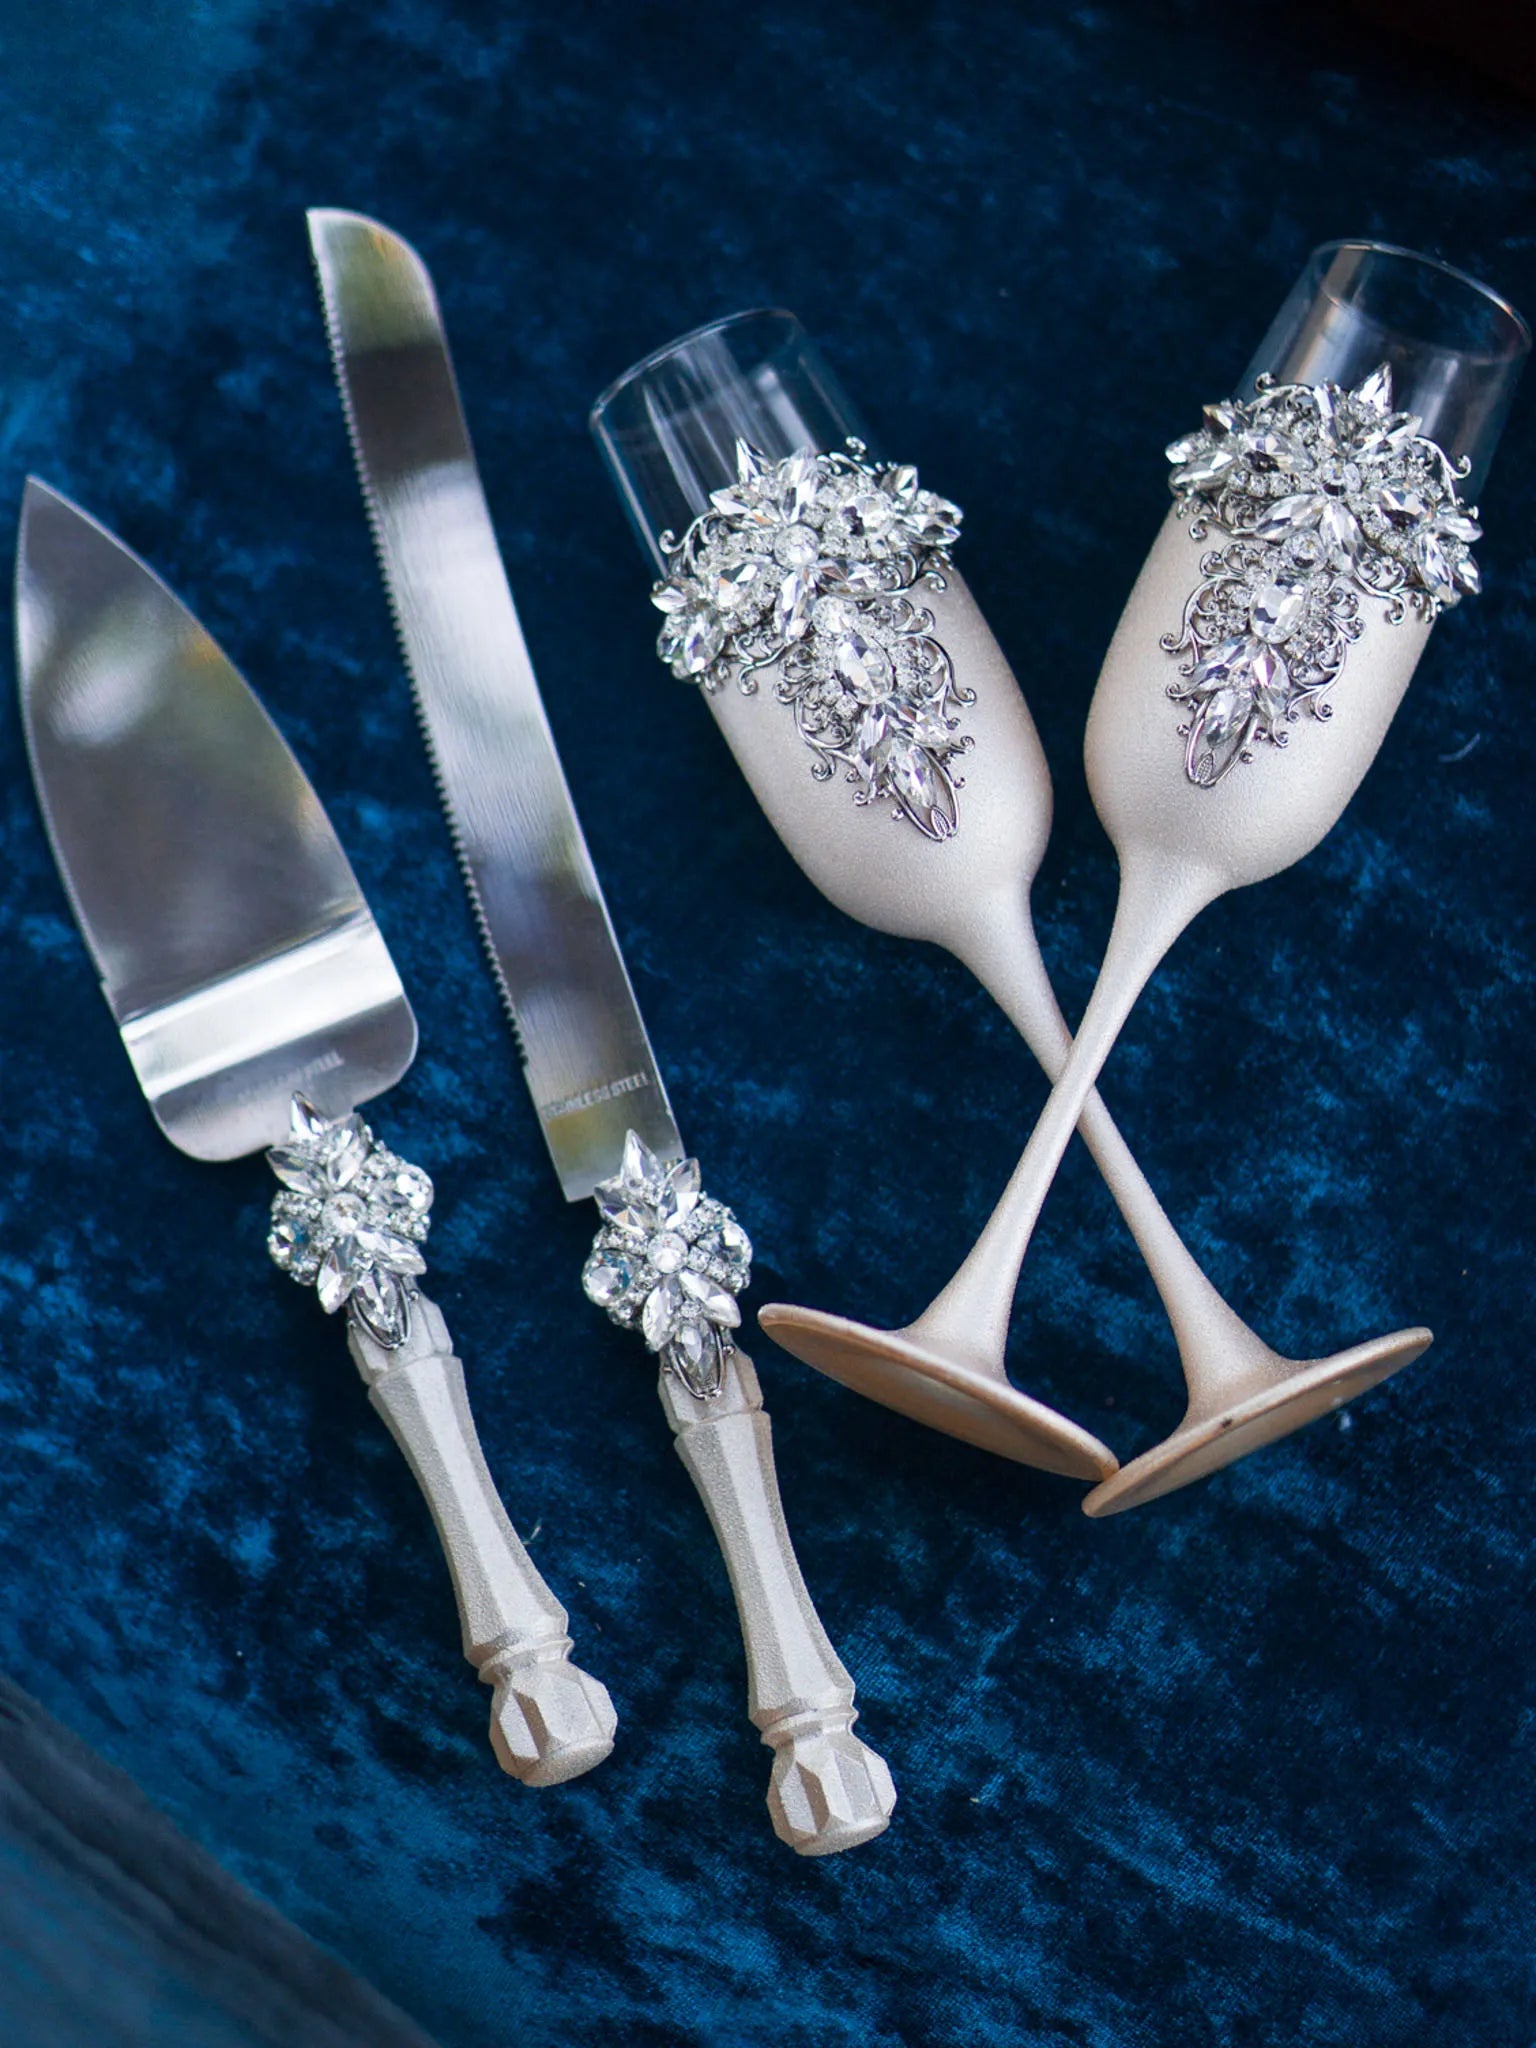 Silver and Ivory Personalized Crystals Mr. and Mrs. Champagne Flutes and Cake Serving Kit